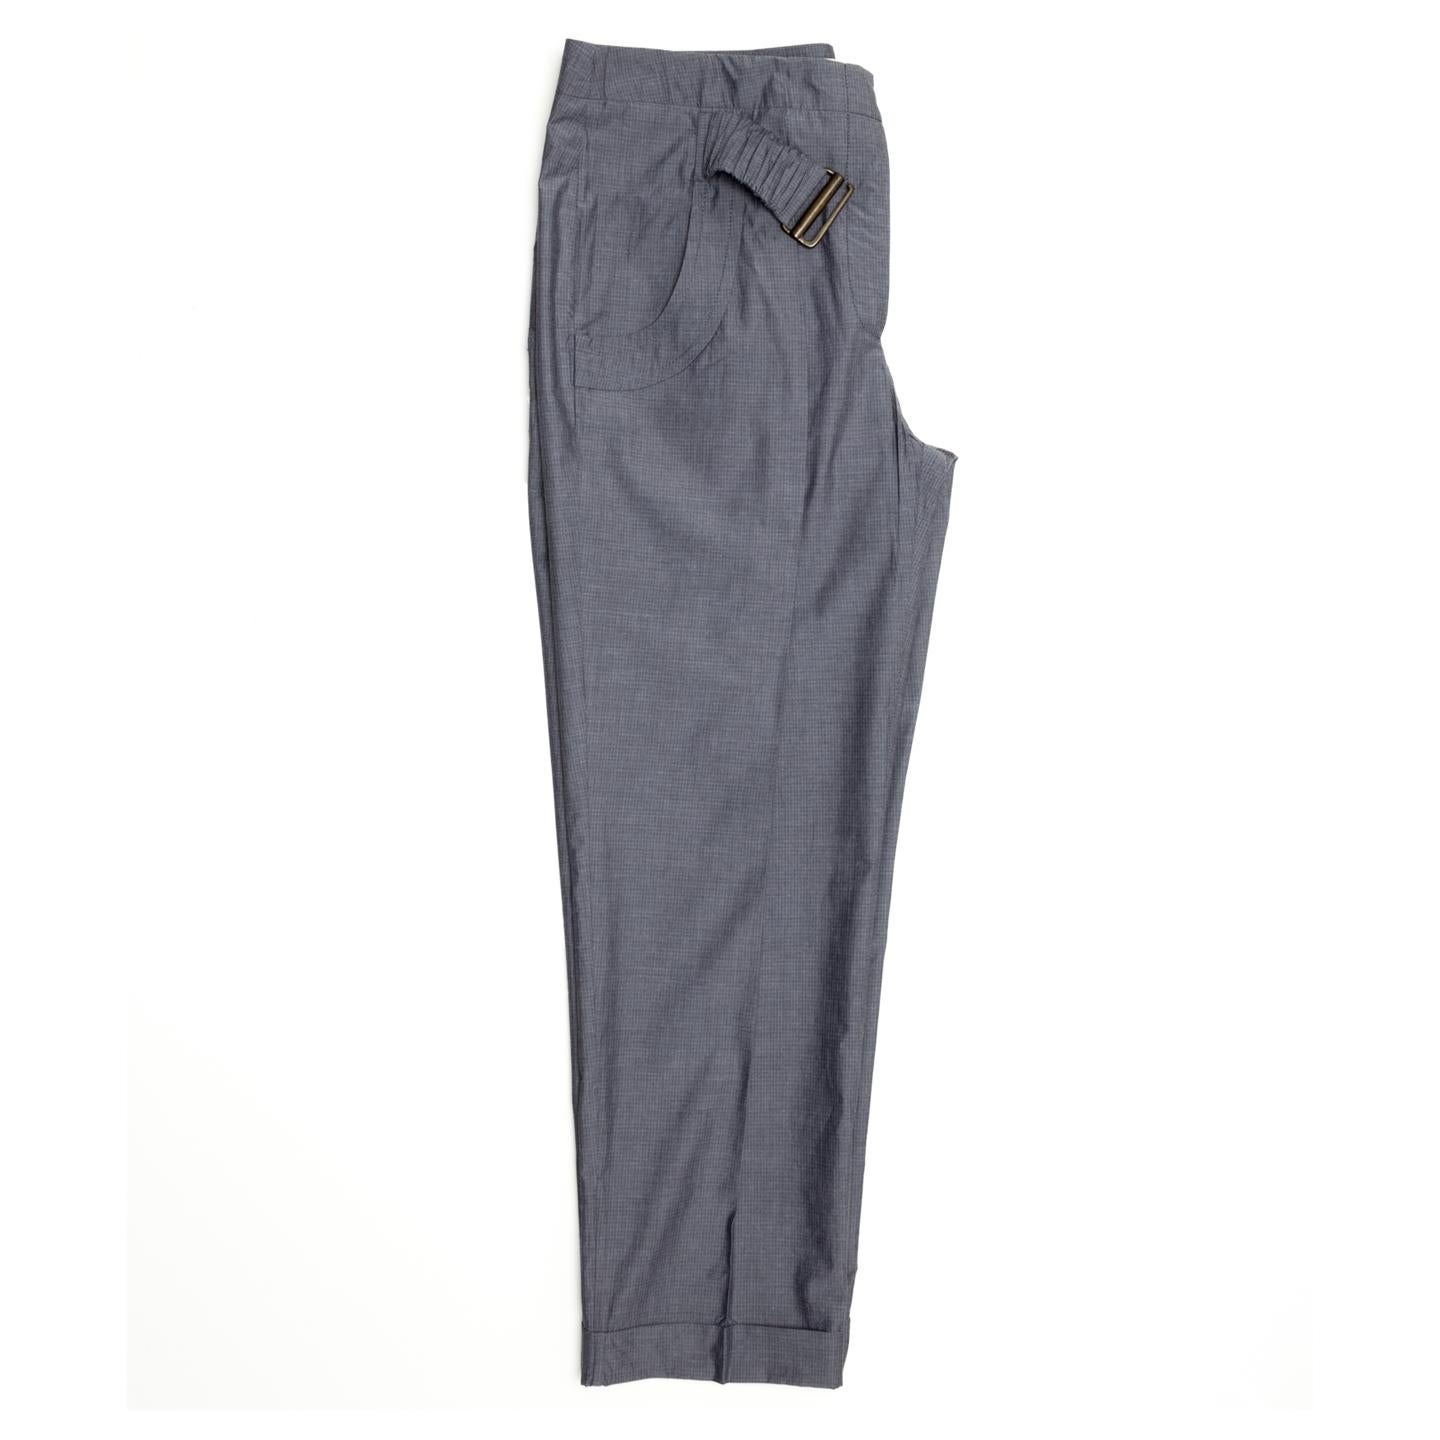 Stella McCartney Grey Check Pleated Pants In Excellent Condition For Sale In Brooklyn, NY